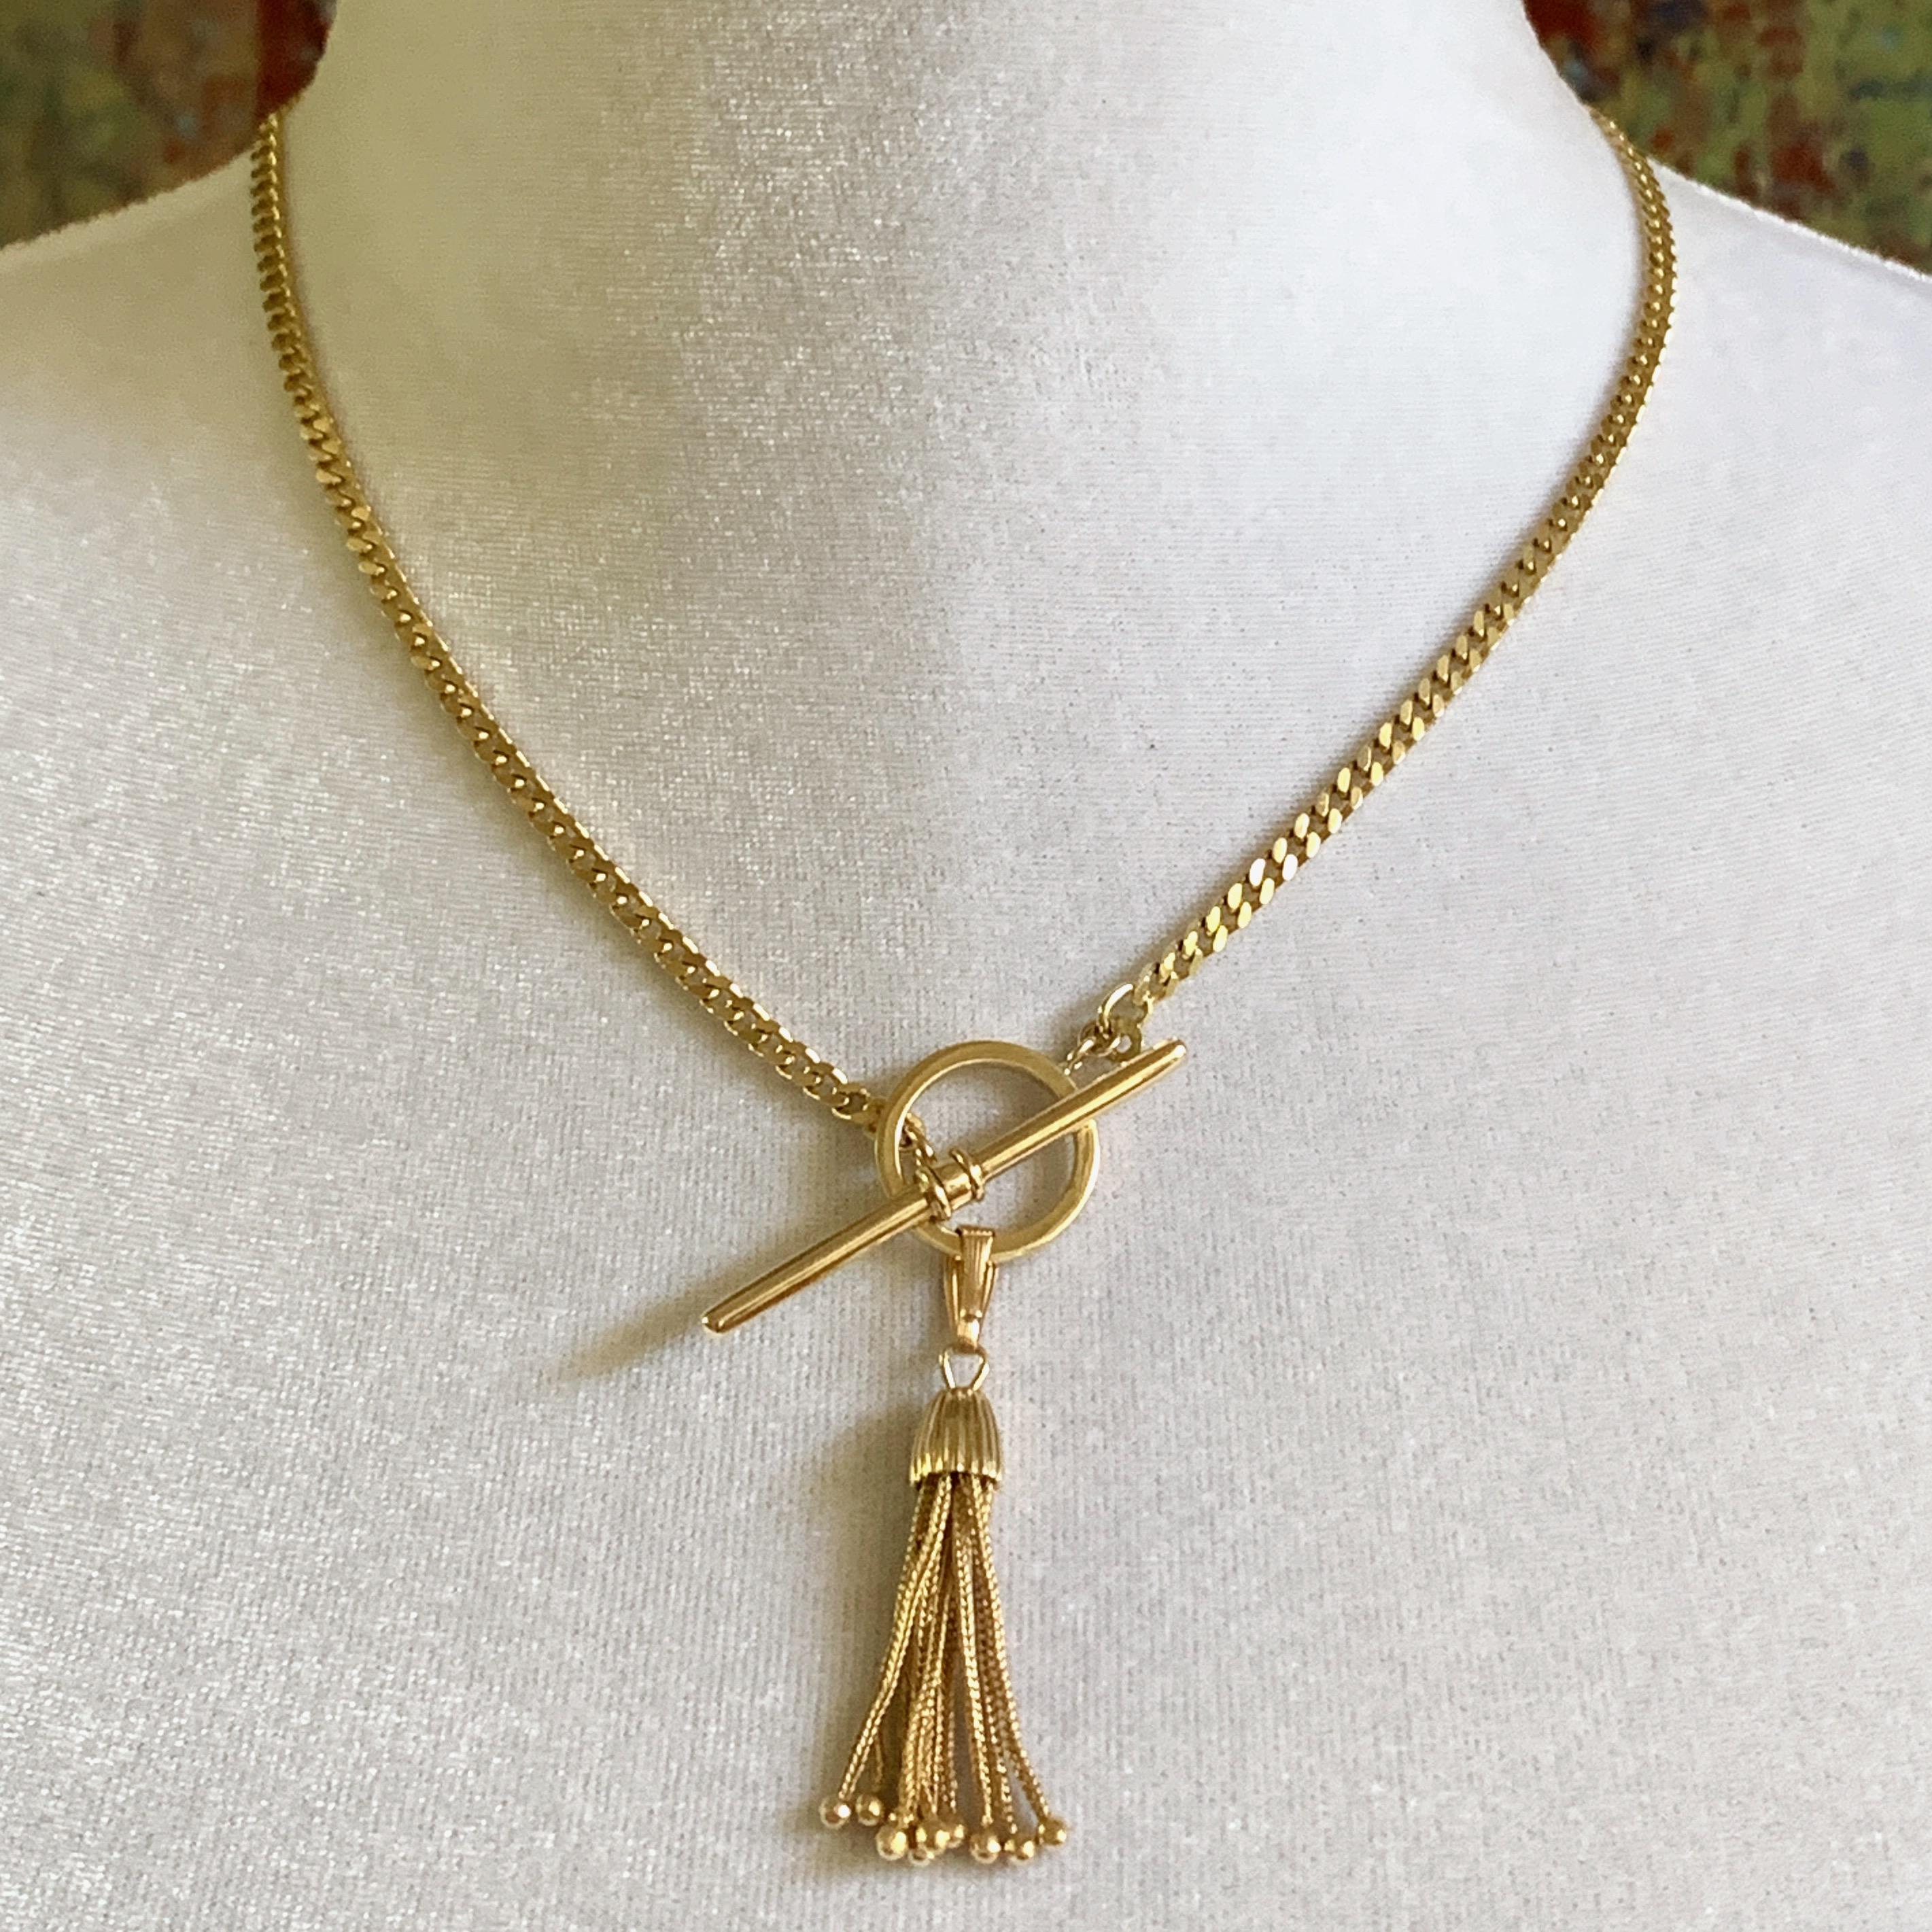 Princess Length Curb Chain with Toggle Closure & Tassel Ornament in Yellow Gold In Excellent Condition For Sale In Sherman Oaks, CA